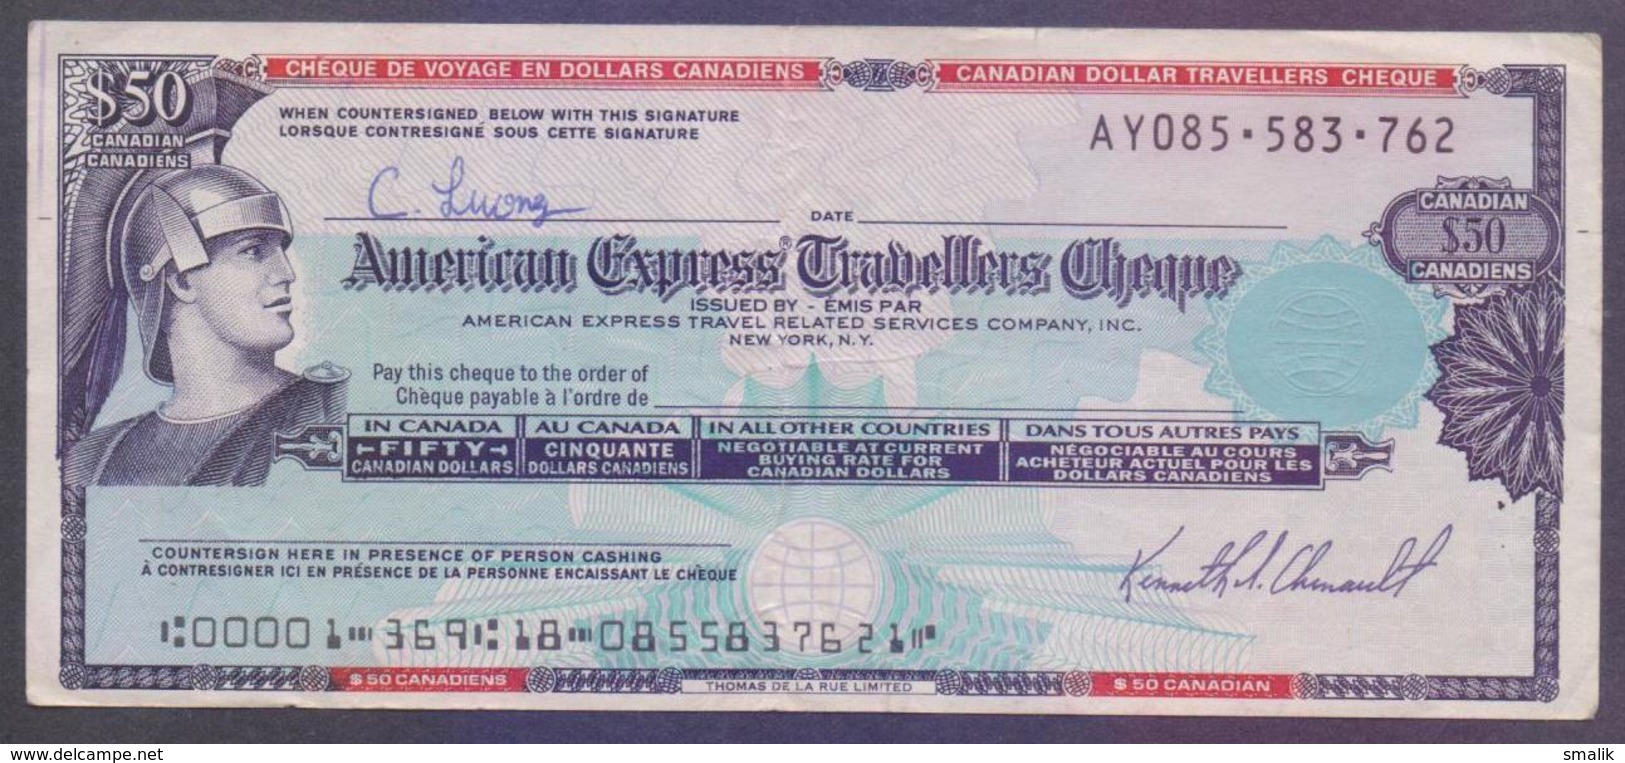 American Express Travelers Cheque US$50 (AY085-583-762) - Cheques & Traveler's Cheques